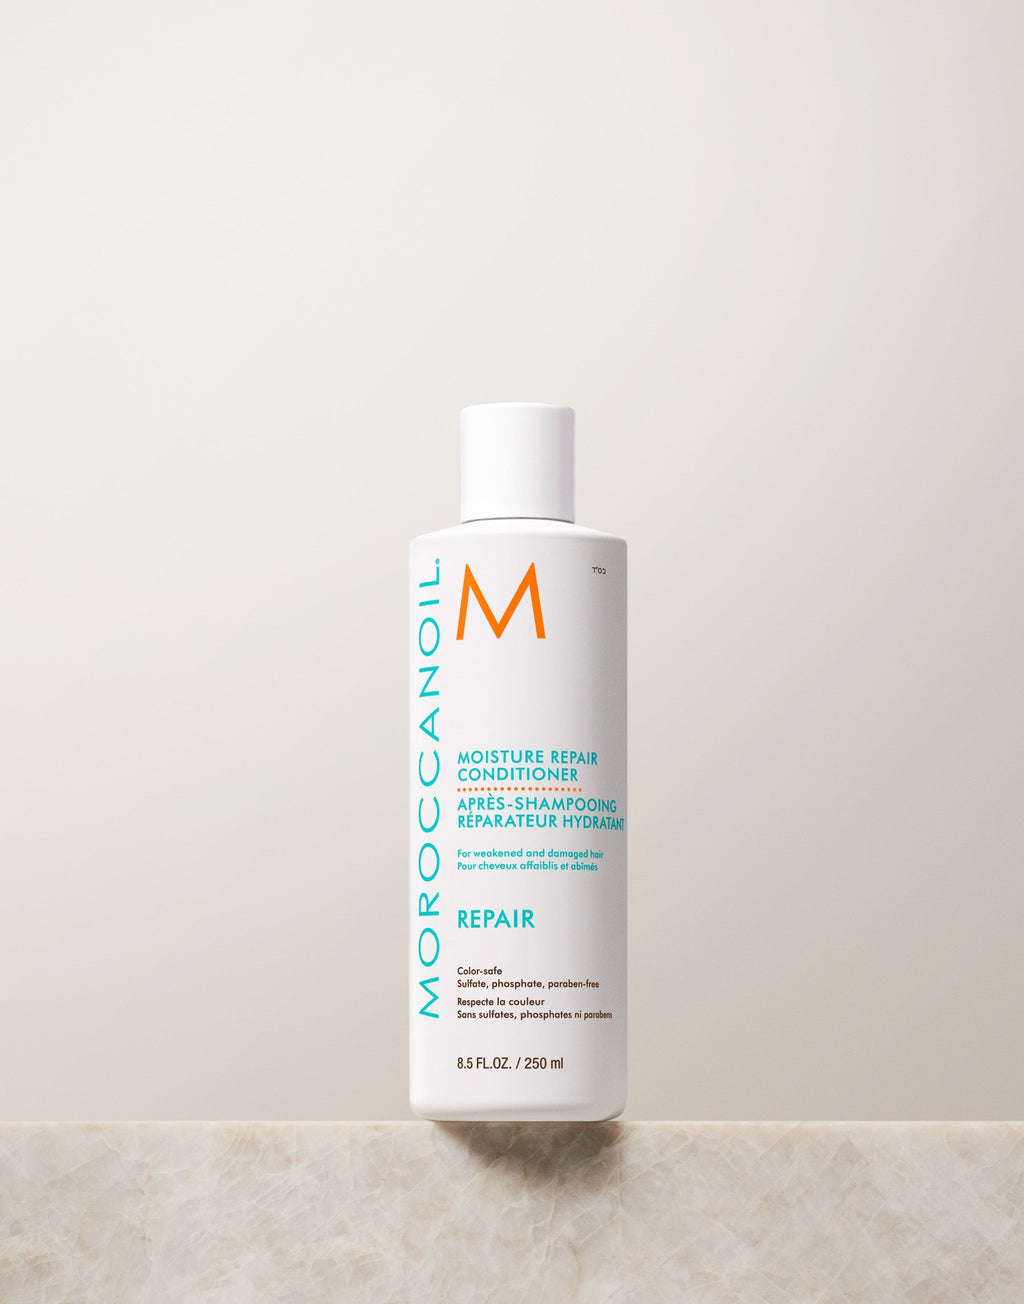 Moisture Repair Conditioner For weakened and damaged hair